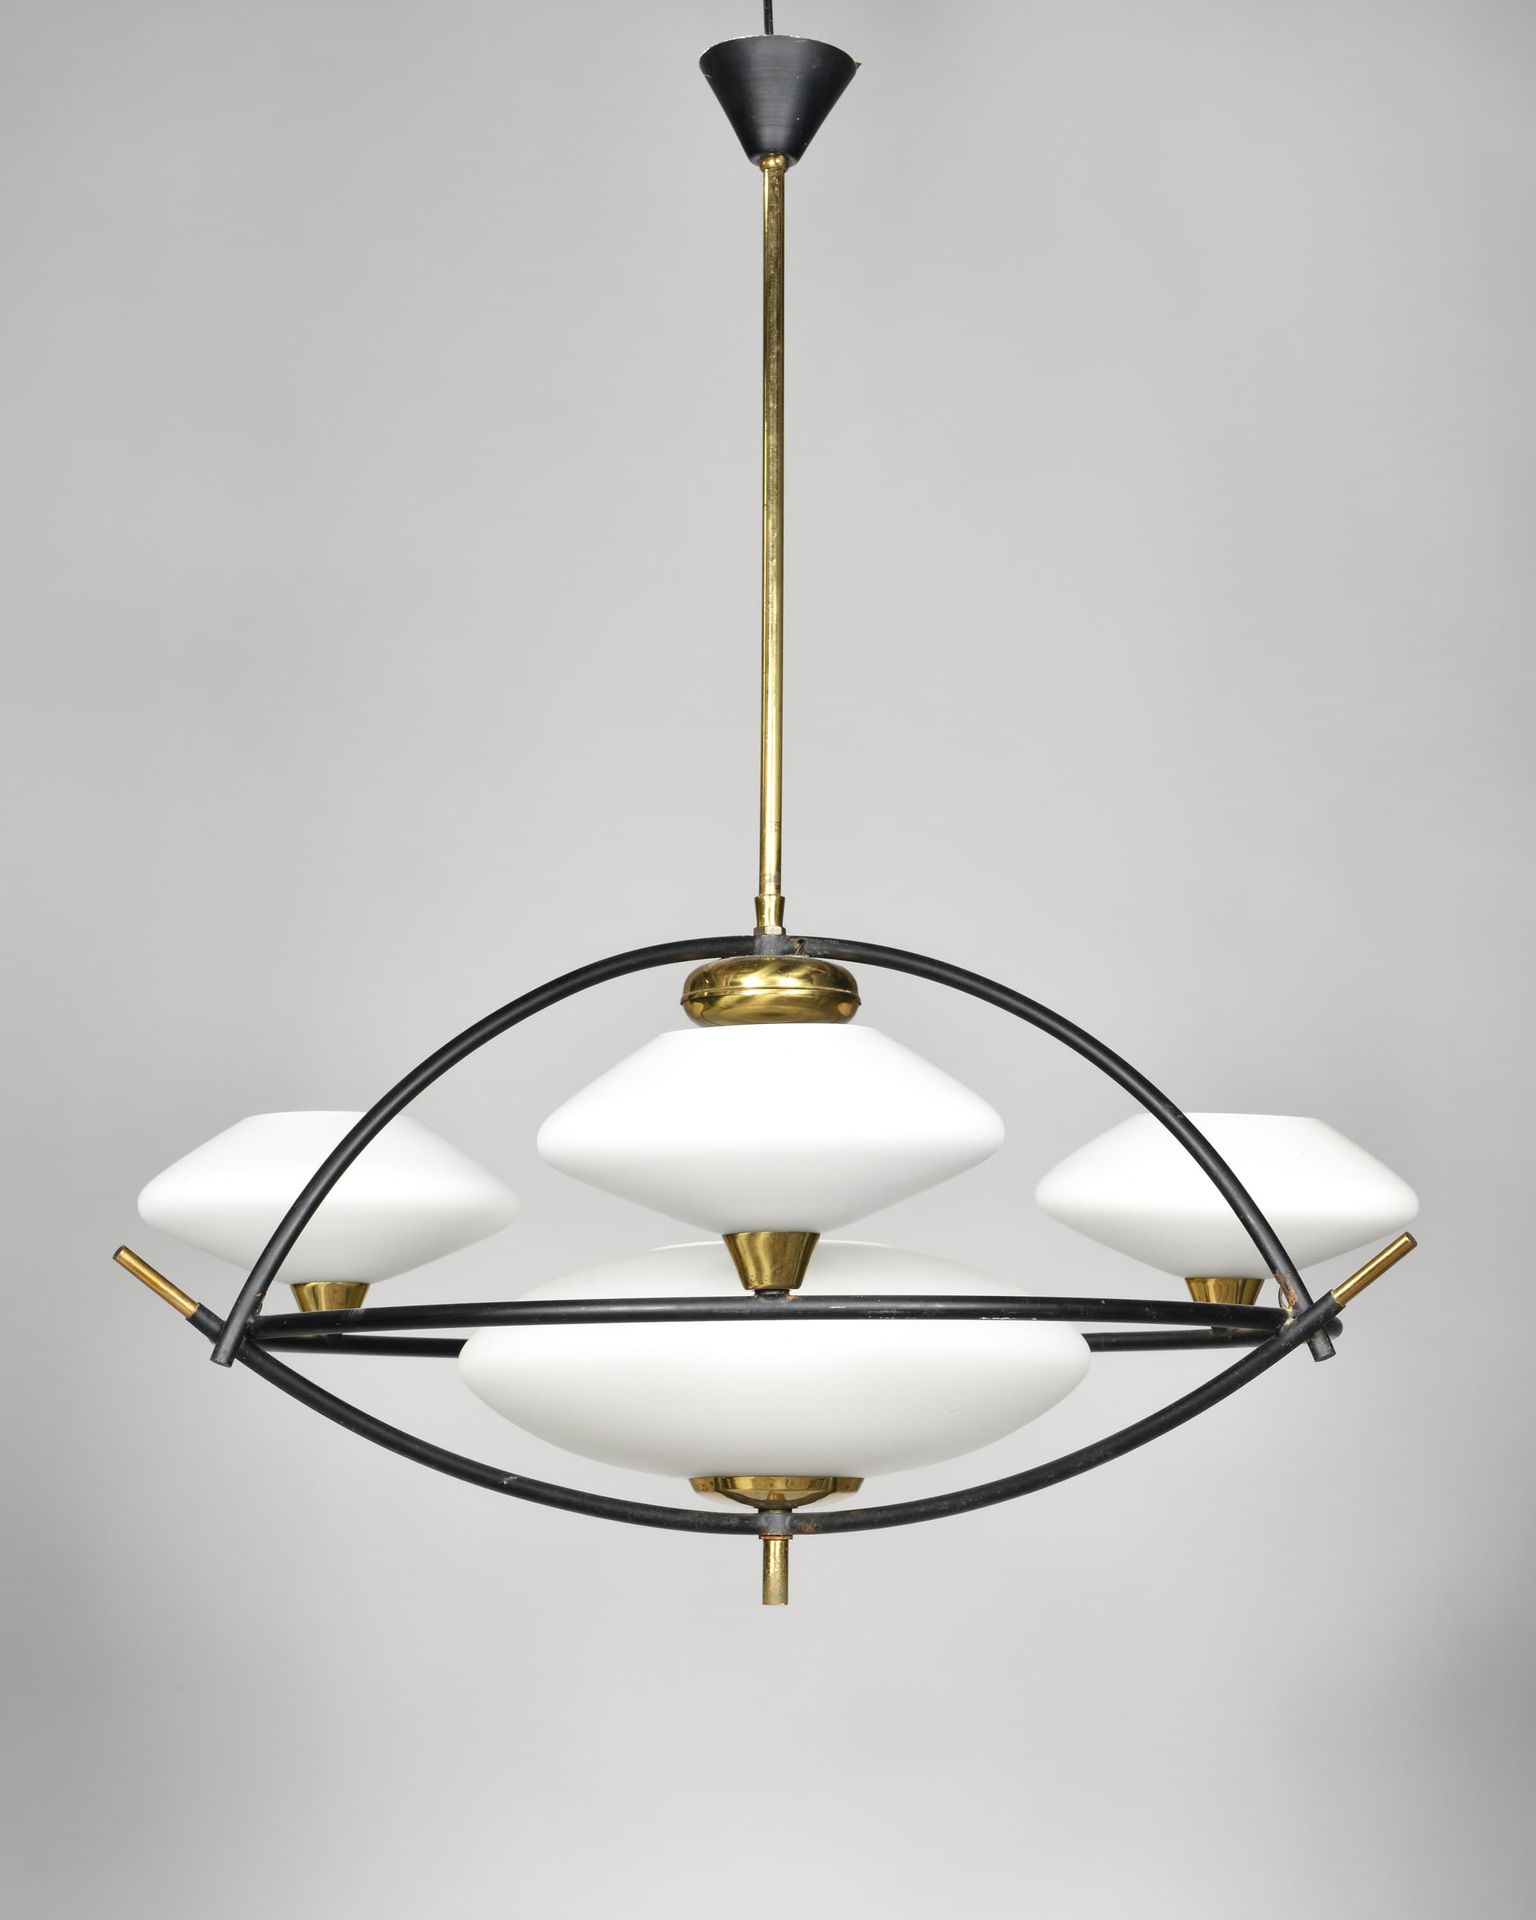 Null Attributed to ARLUS
Blackened metal and gilded brass tube suspension holdin&hellip;